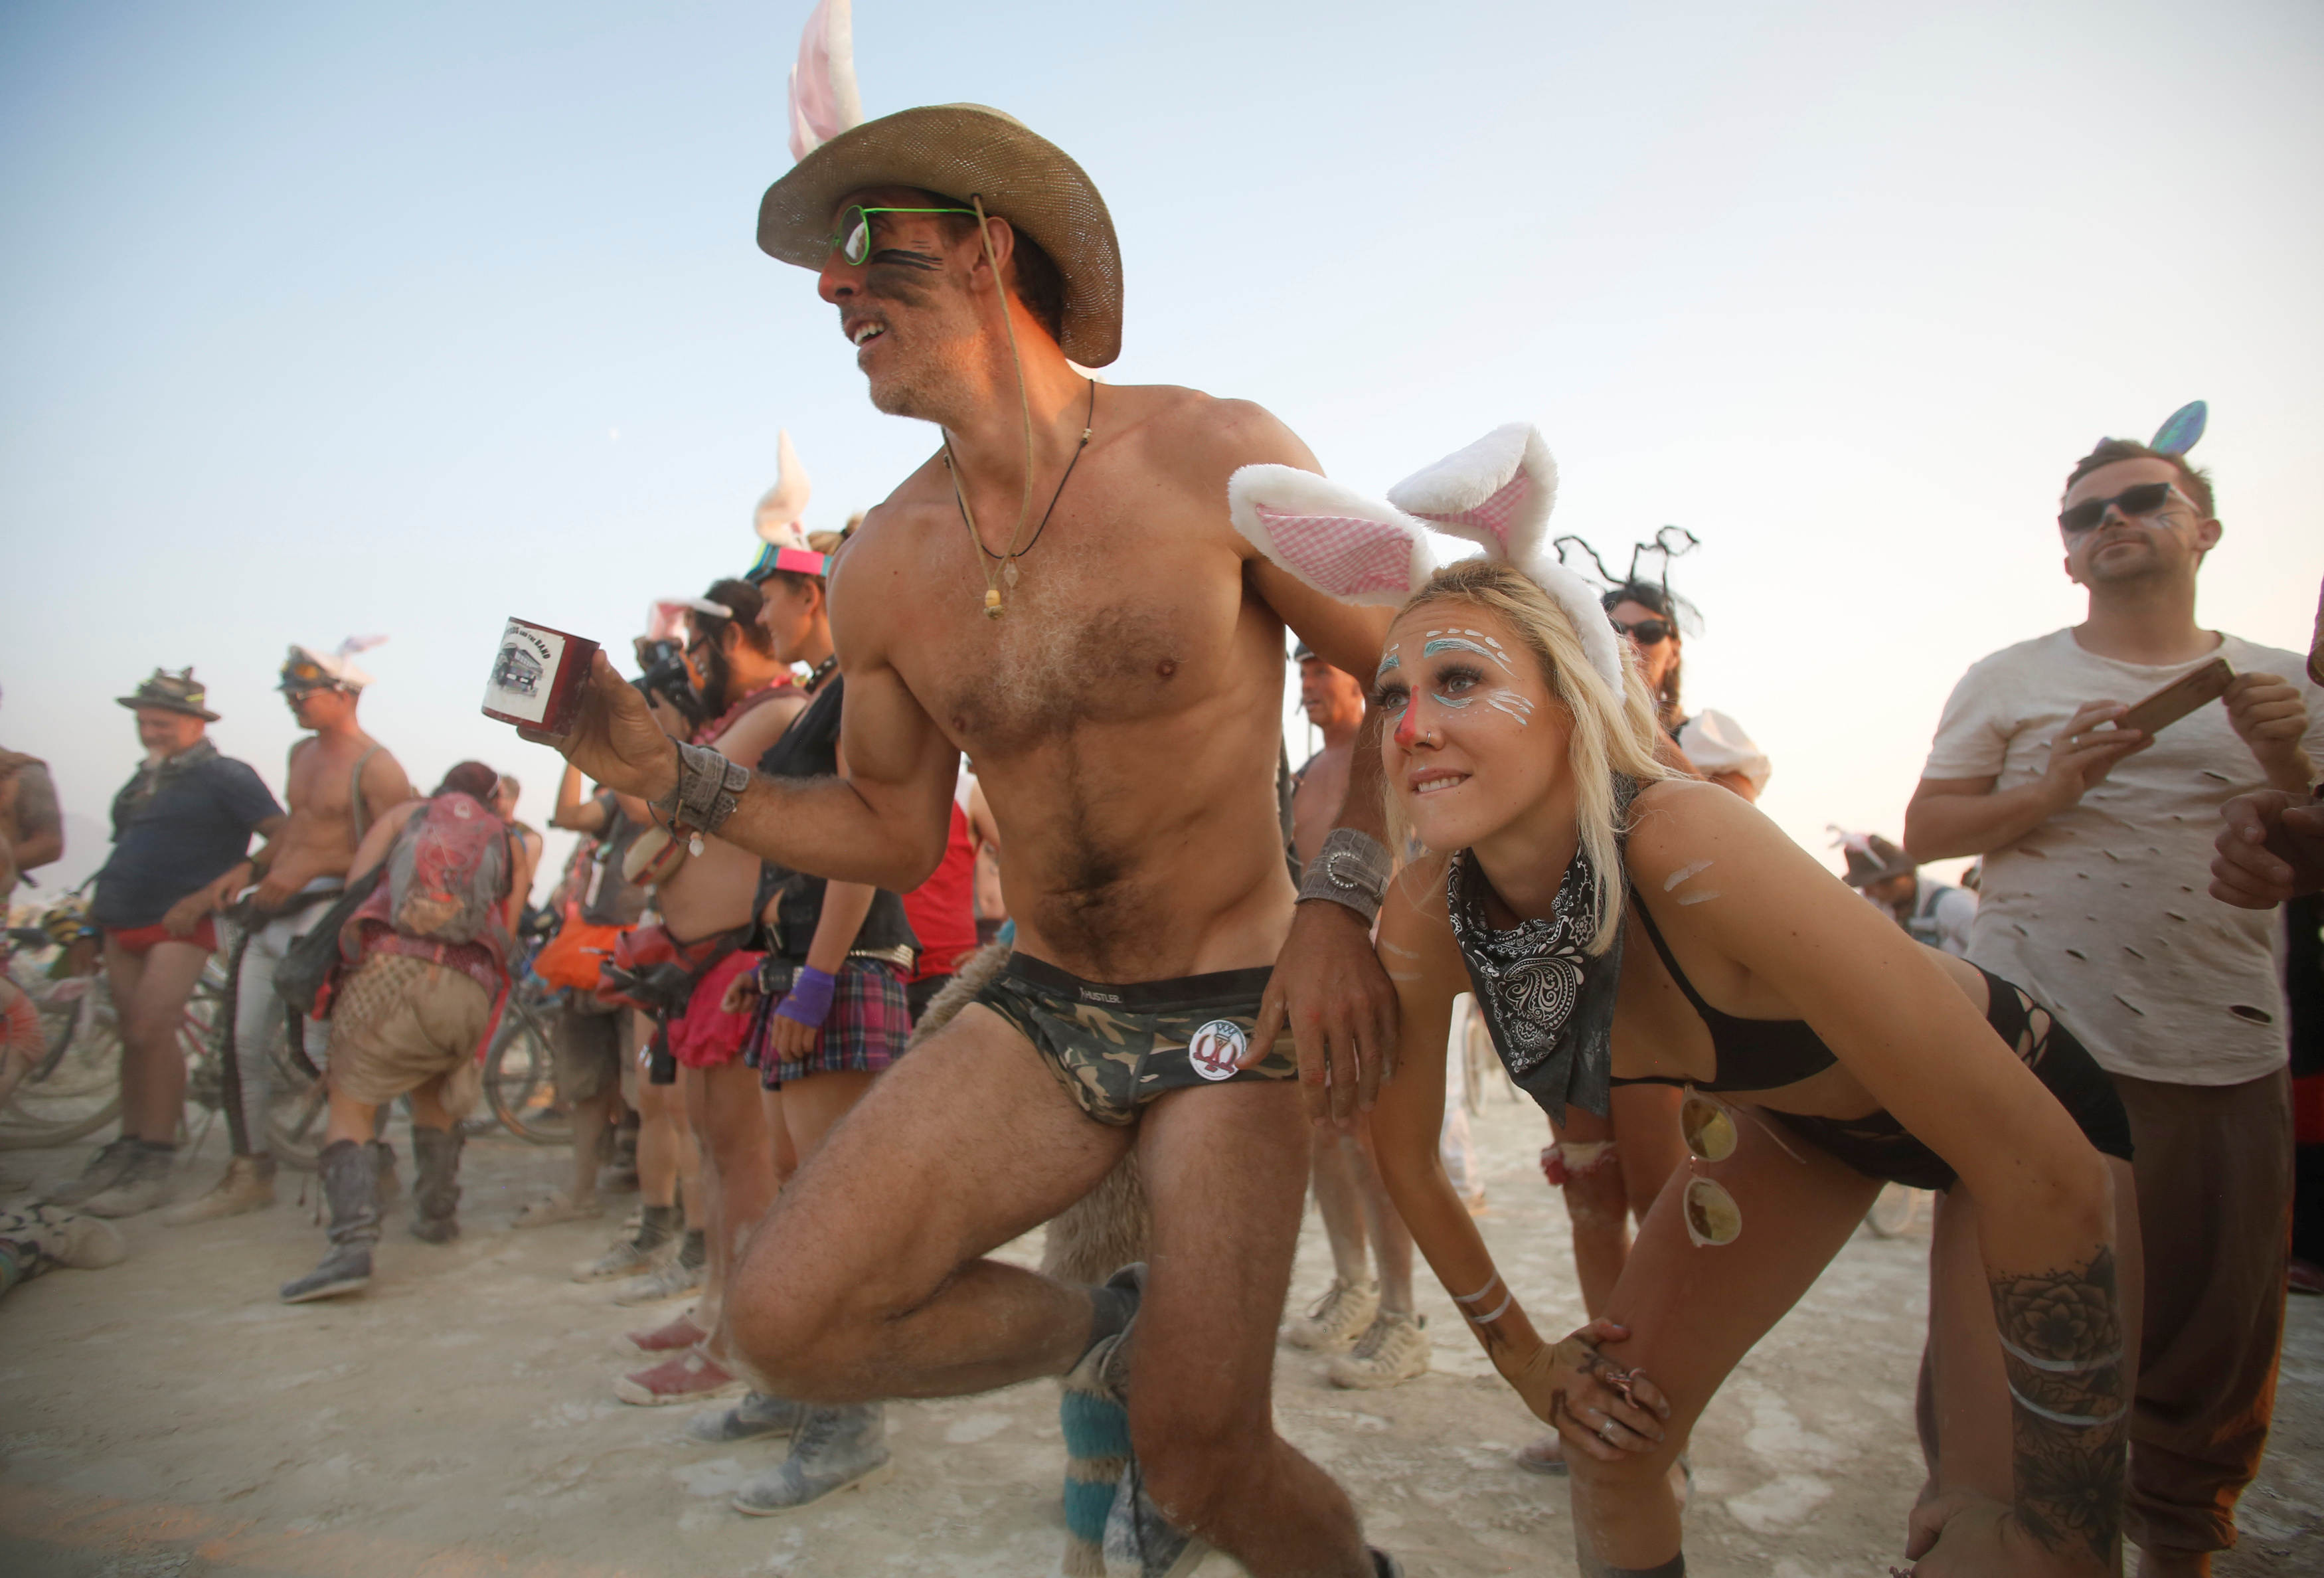 clyde stone recommends topless at burning man pic